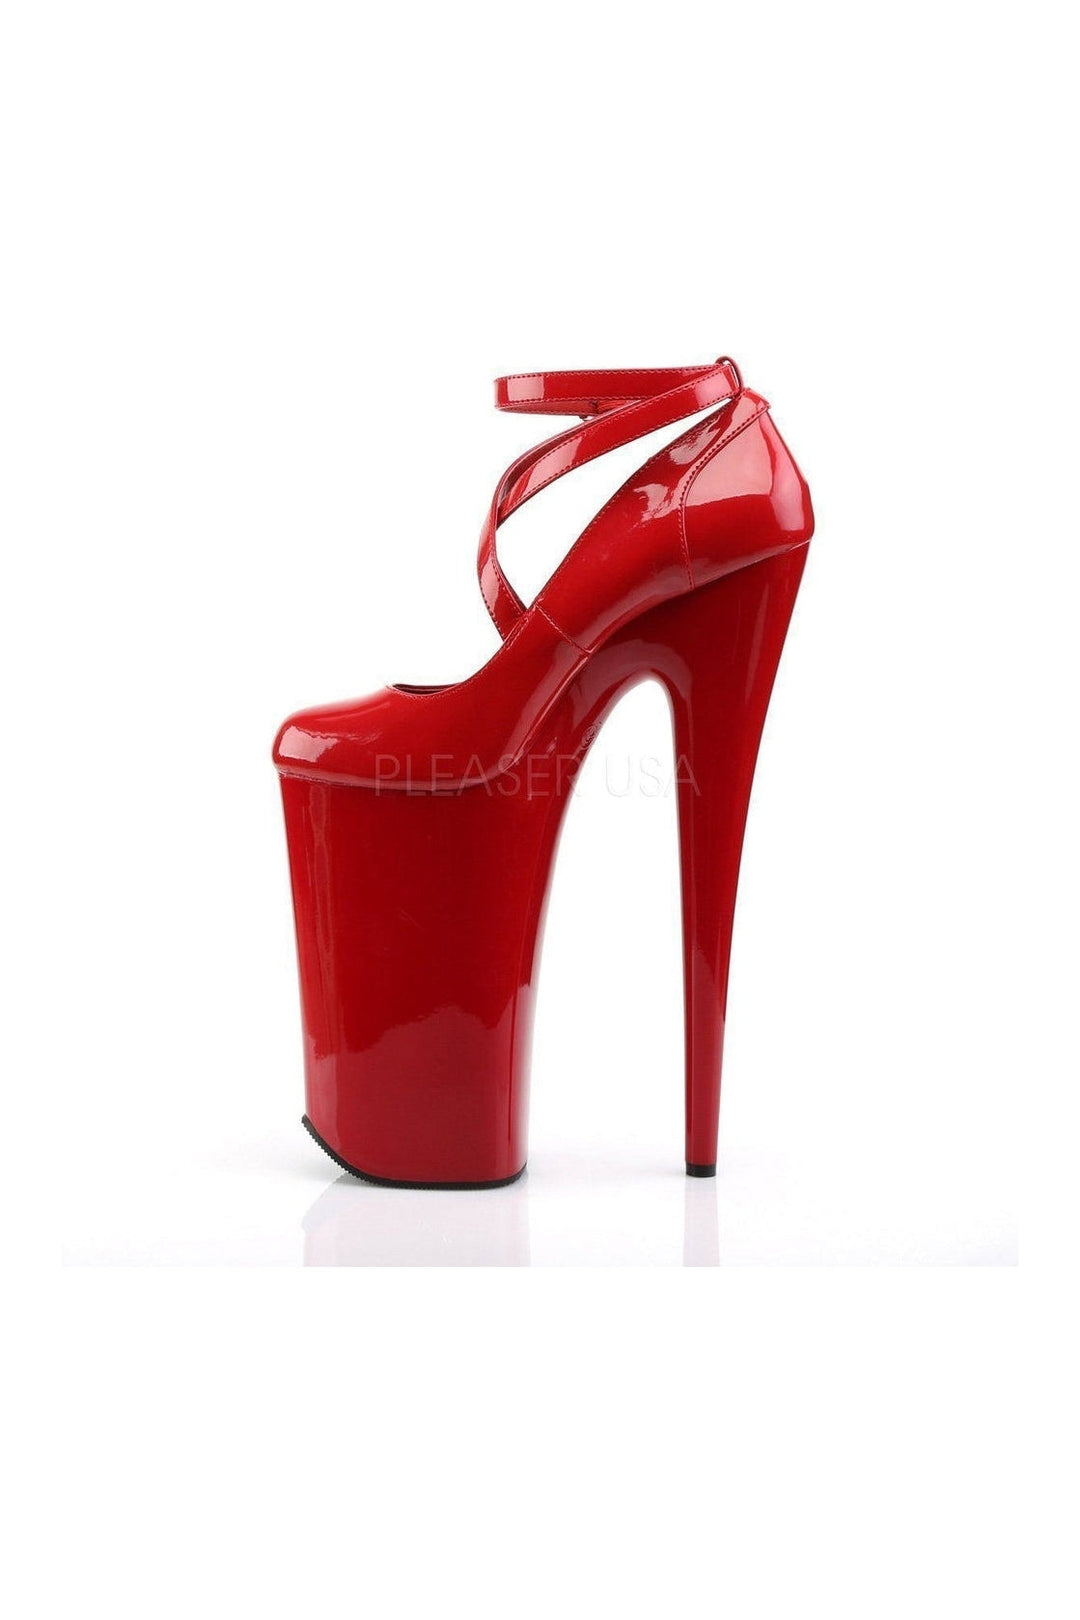 BEYOND-087 Pump | Red Patent-Pleaser-Pumps-SEXYSHOES.COM